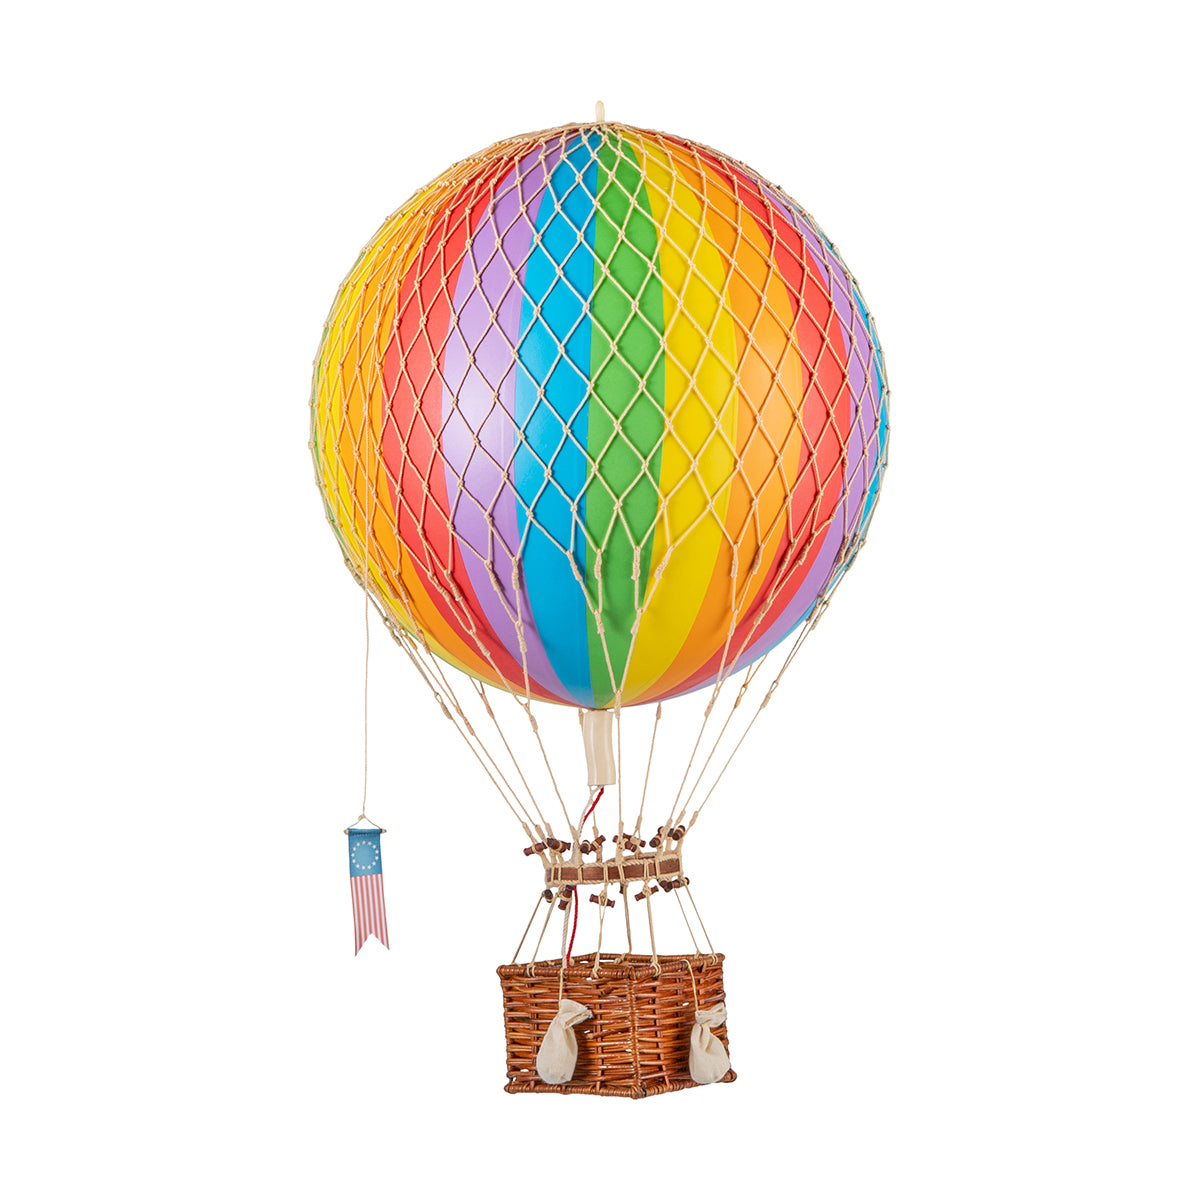 A Wonderen Medium Hot Air Balloon - Royal Aero, soaring to new heights, showcases a unique perspective against a white background.